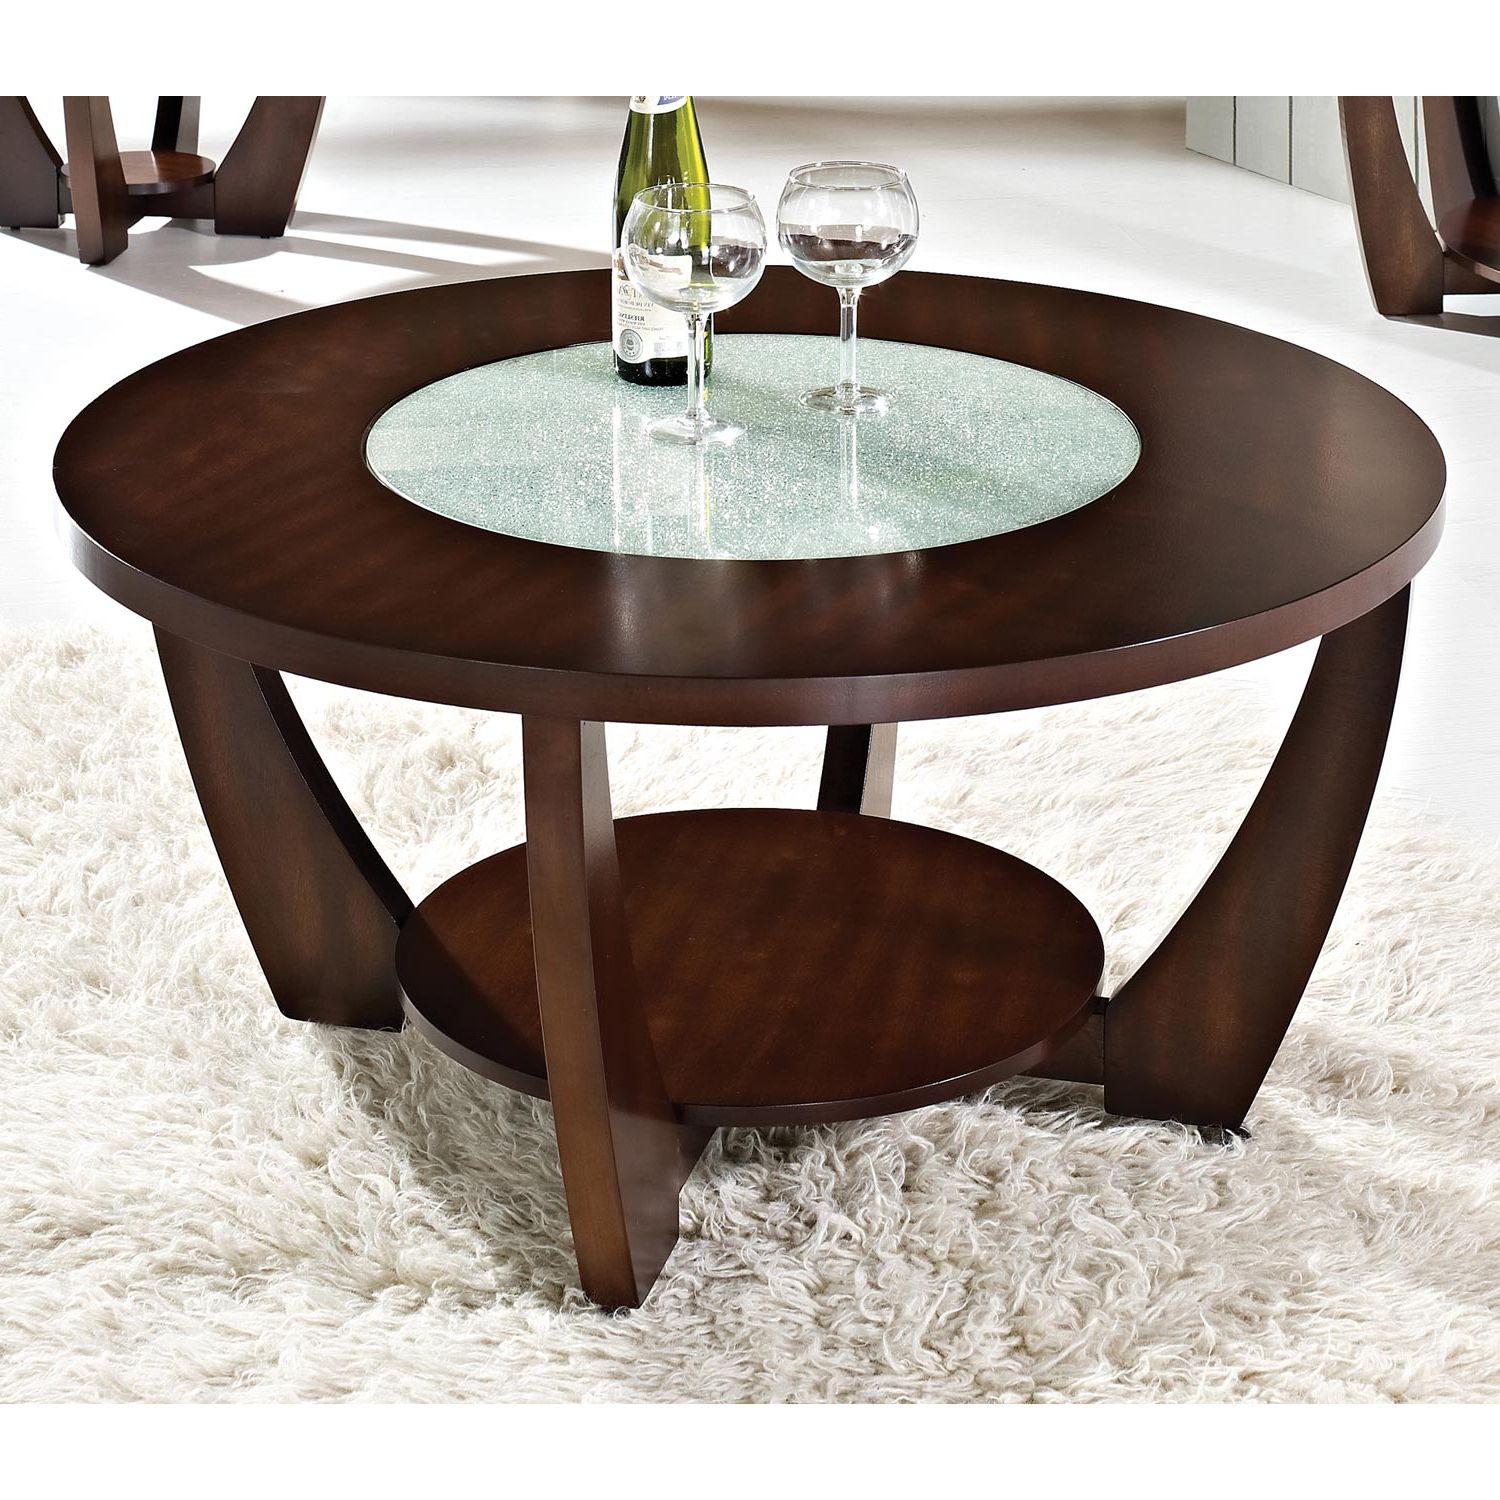 Round Coffee Tables Within Most Recent Rafael Round Coffee Table – Crackled Glass, Dark Cherry Wood (View 13 of 15)